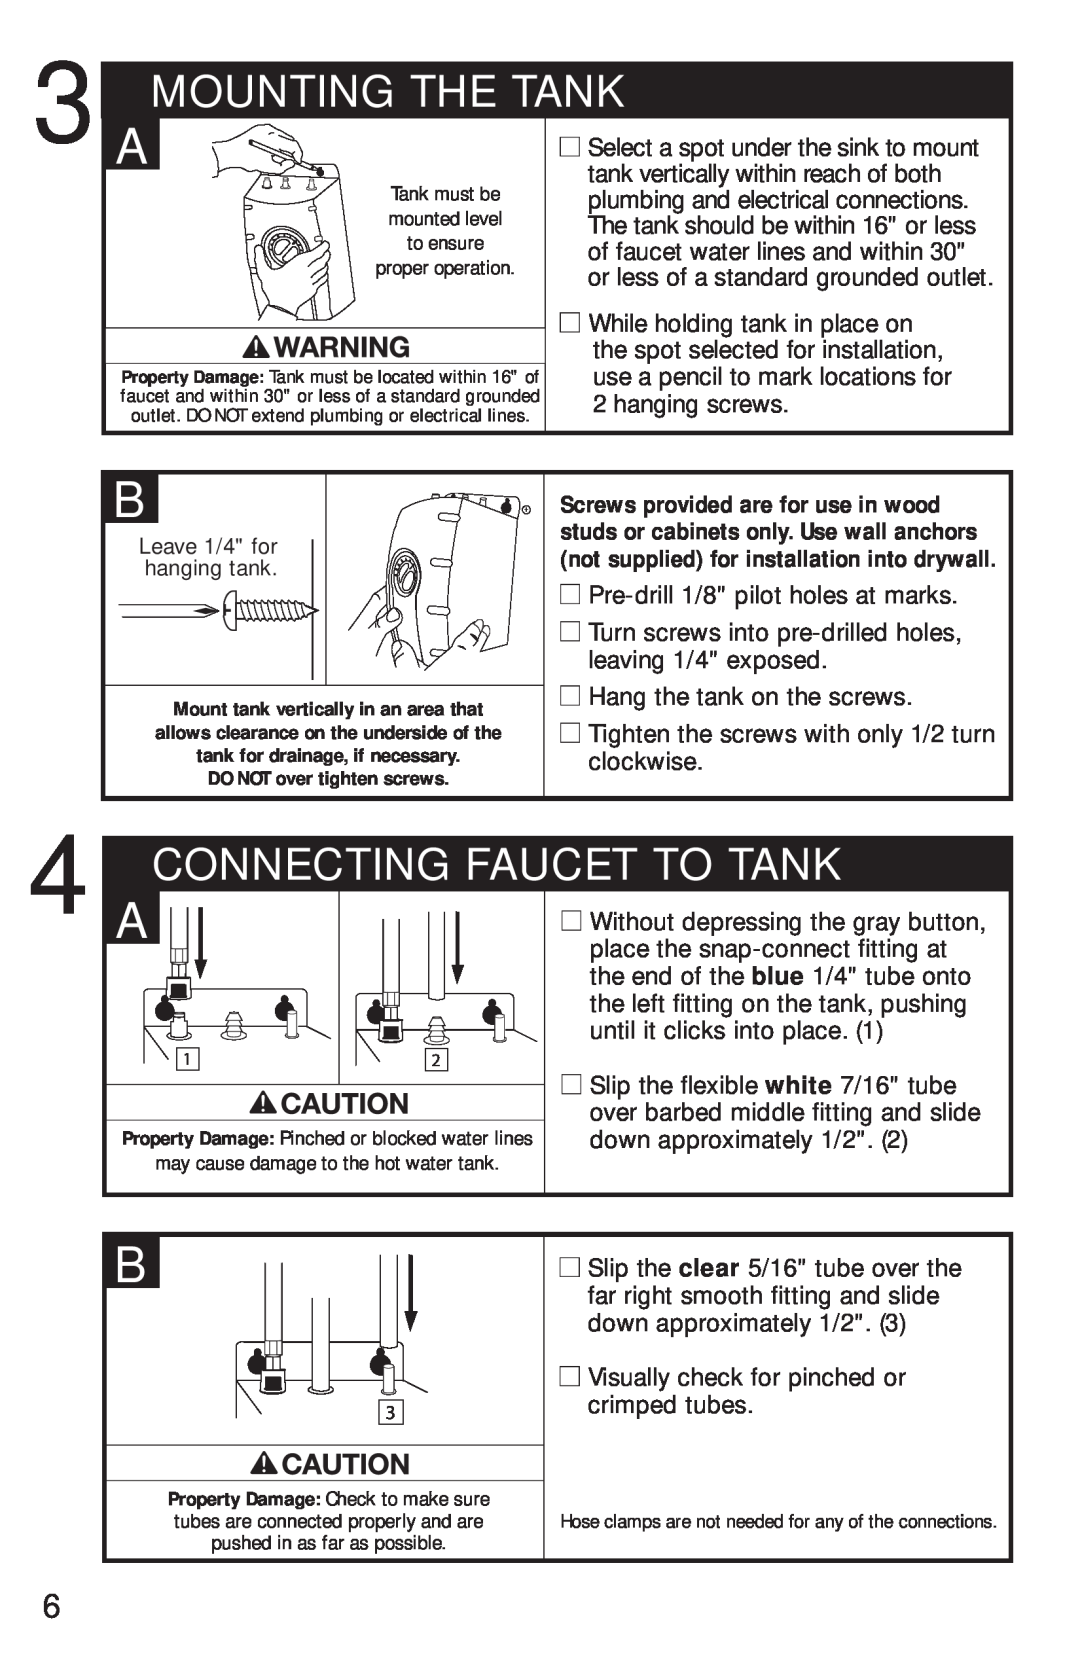 InSinkErator FAUCET owner manual Mounting The Tank, Connecting Faucet To Tank 